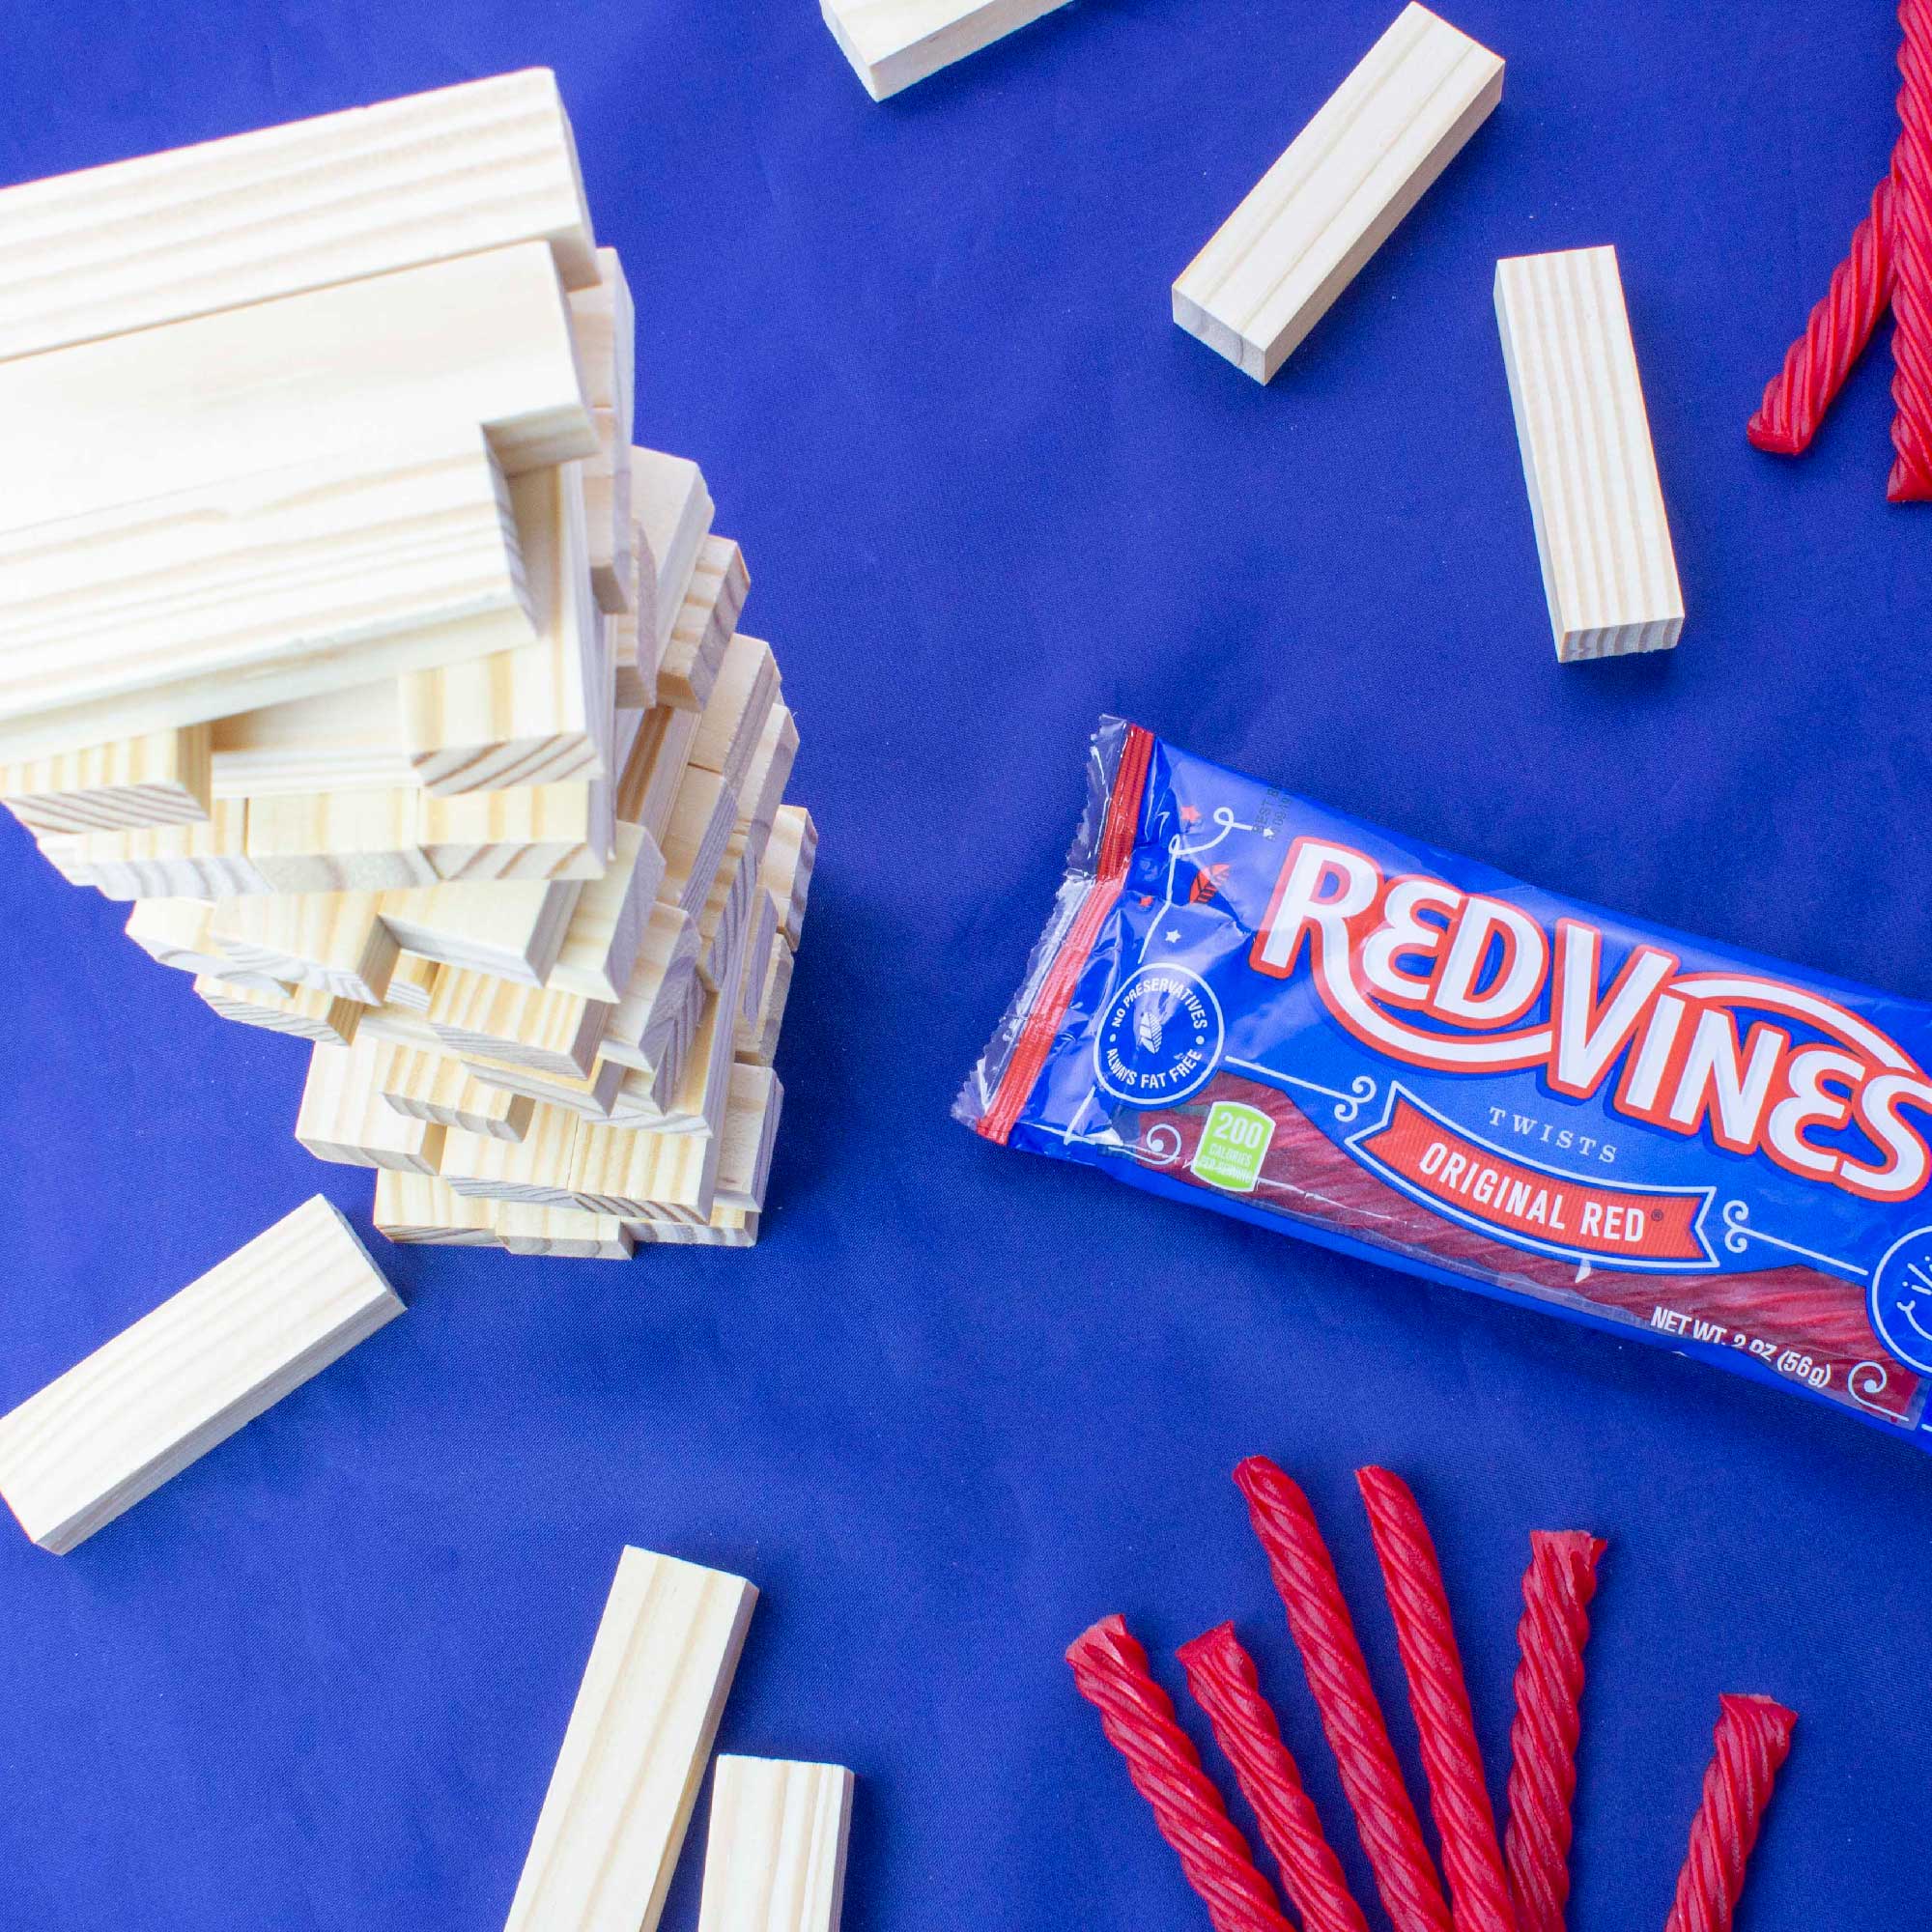 Red Vines Original Red® Chewy Licorice Twists 2oz Bags